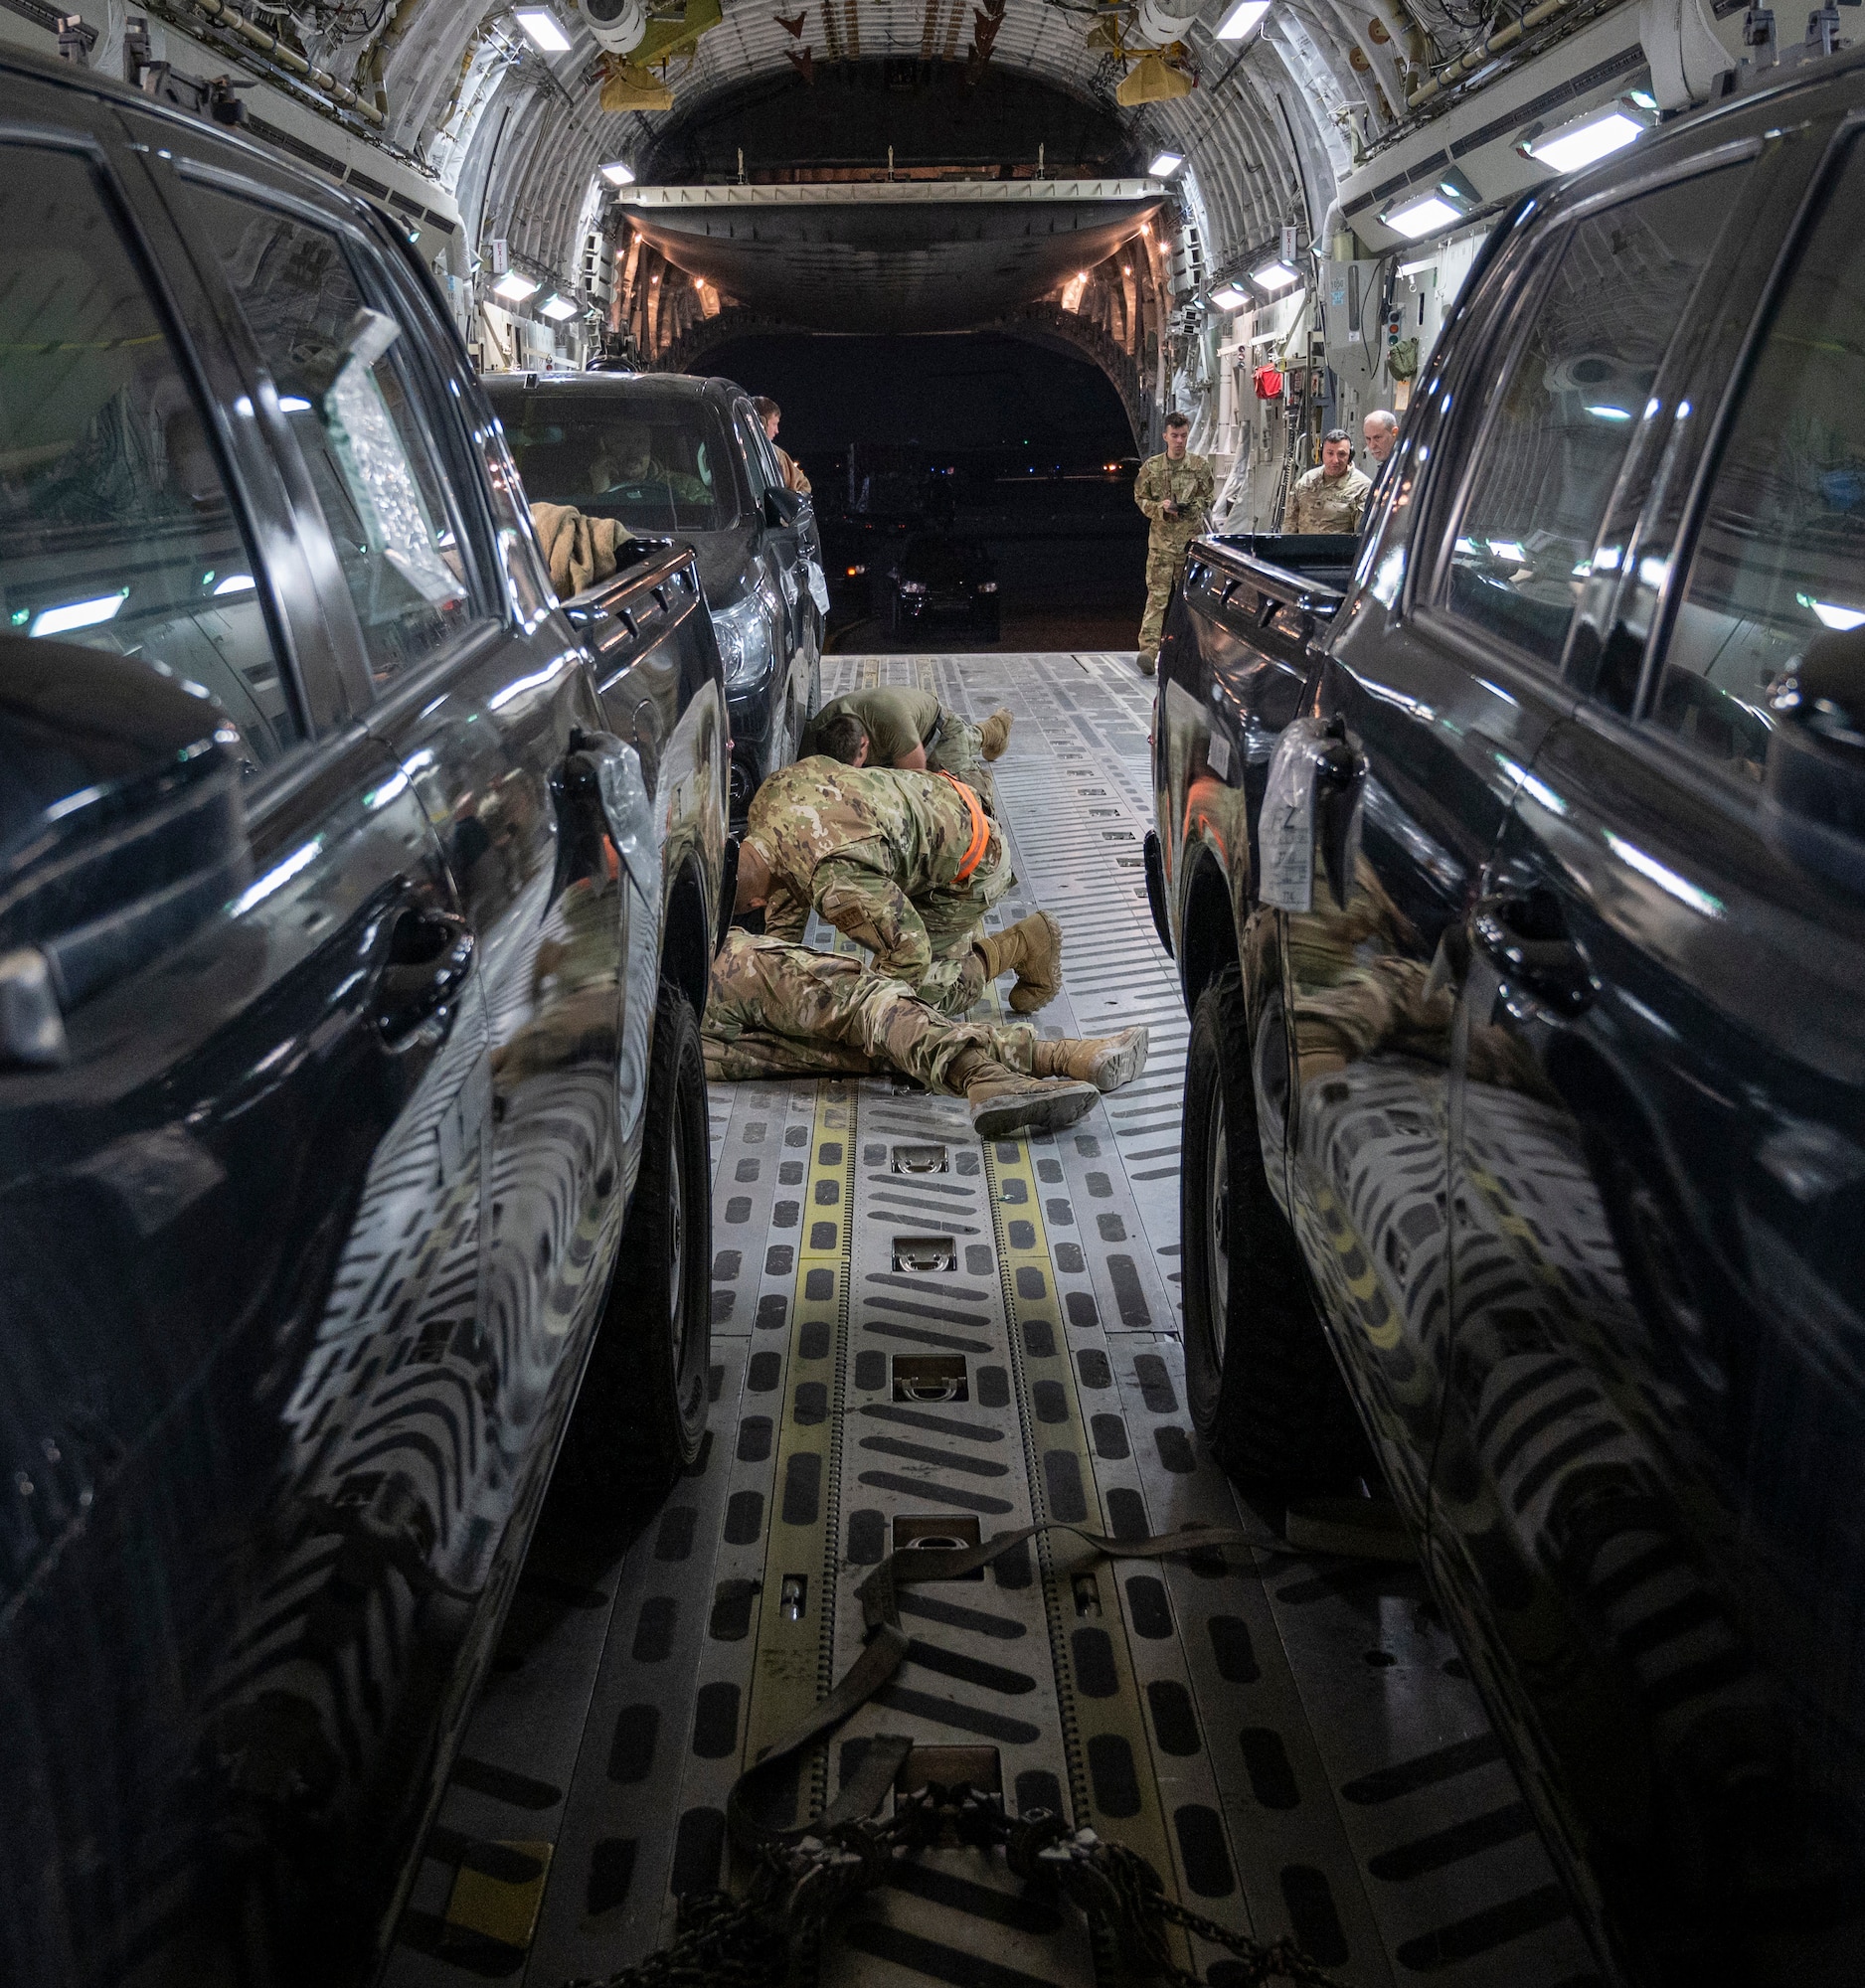 U.S. Air Force Airmen from the 386th Logistics Readiness Squadron secure a compact pick-up truck on a C-17 Globemaster III